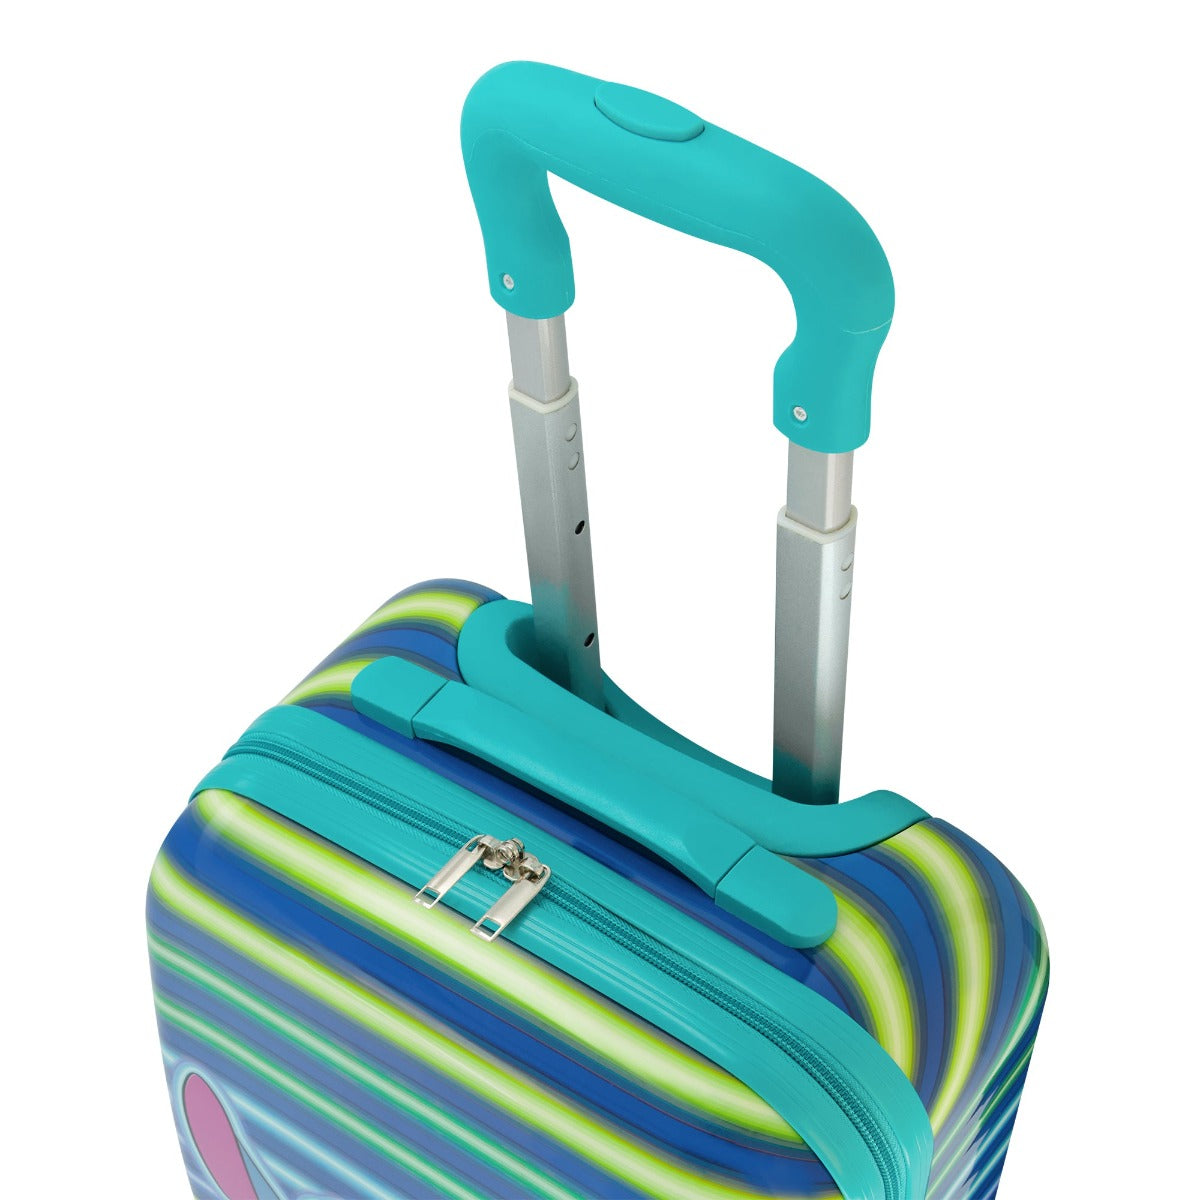 Disney Ful Stitch Neon Stripe Hardside Spinner Luggage - Blue 21" Carry On Suitcase for Kids